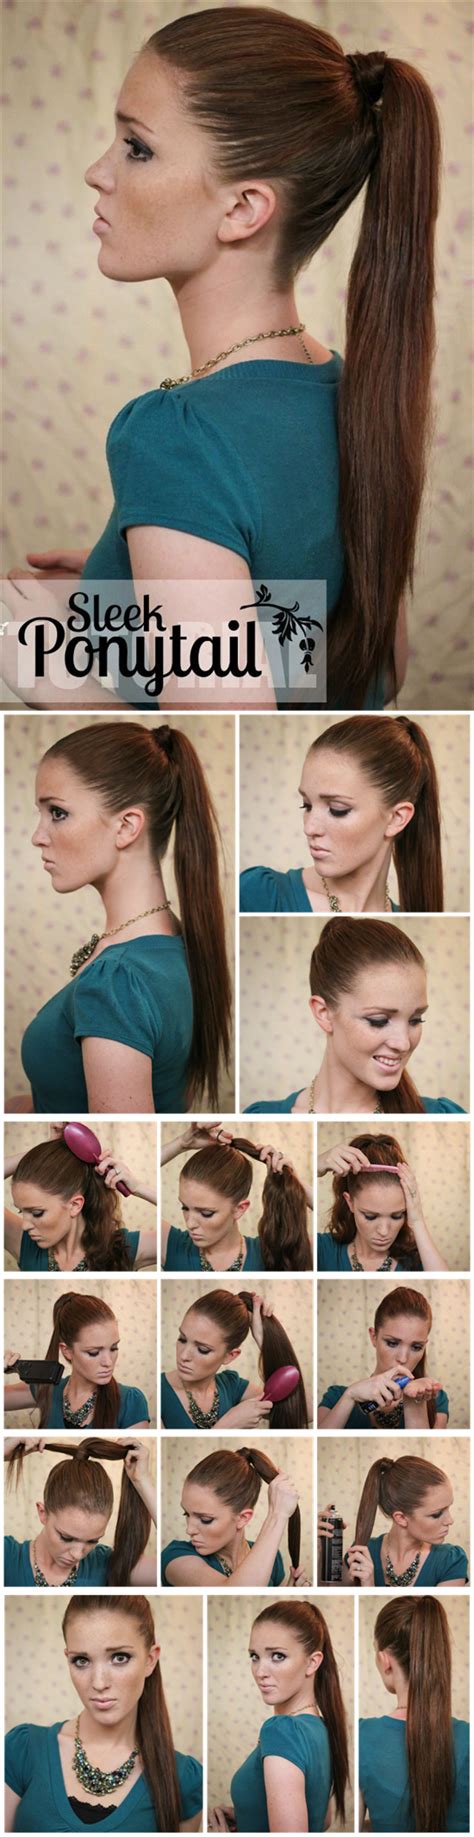 5 One Minute Basic Ponytail Hairstyles Tutorial For Daily Style